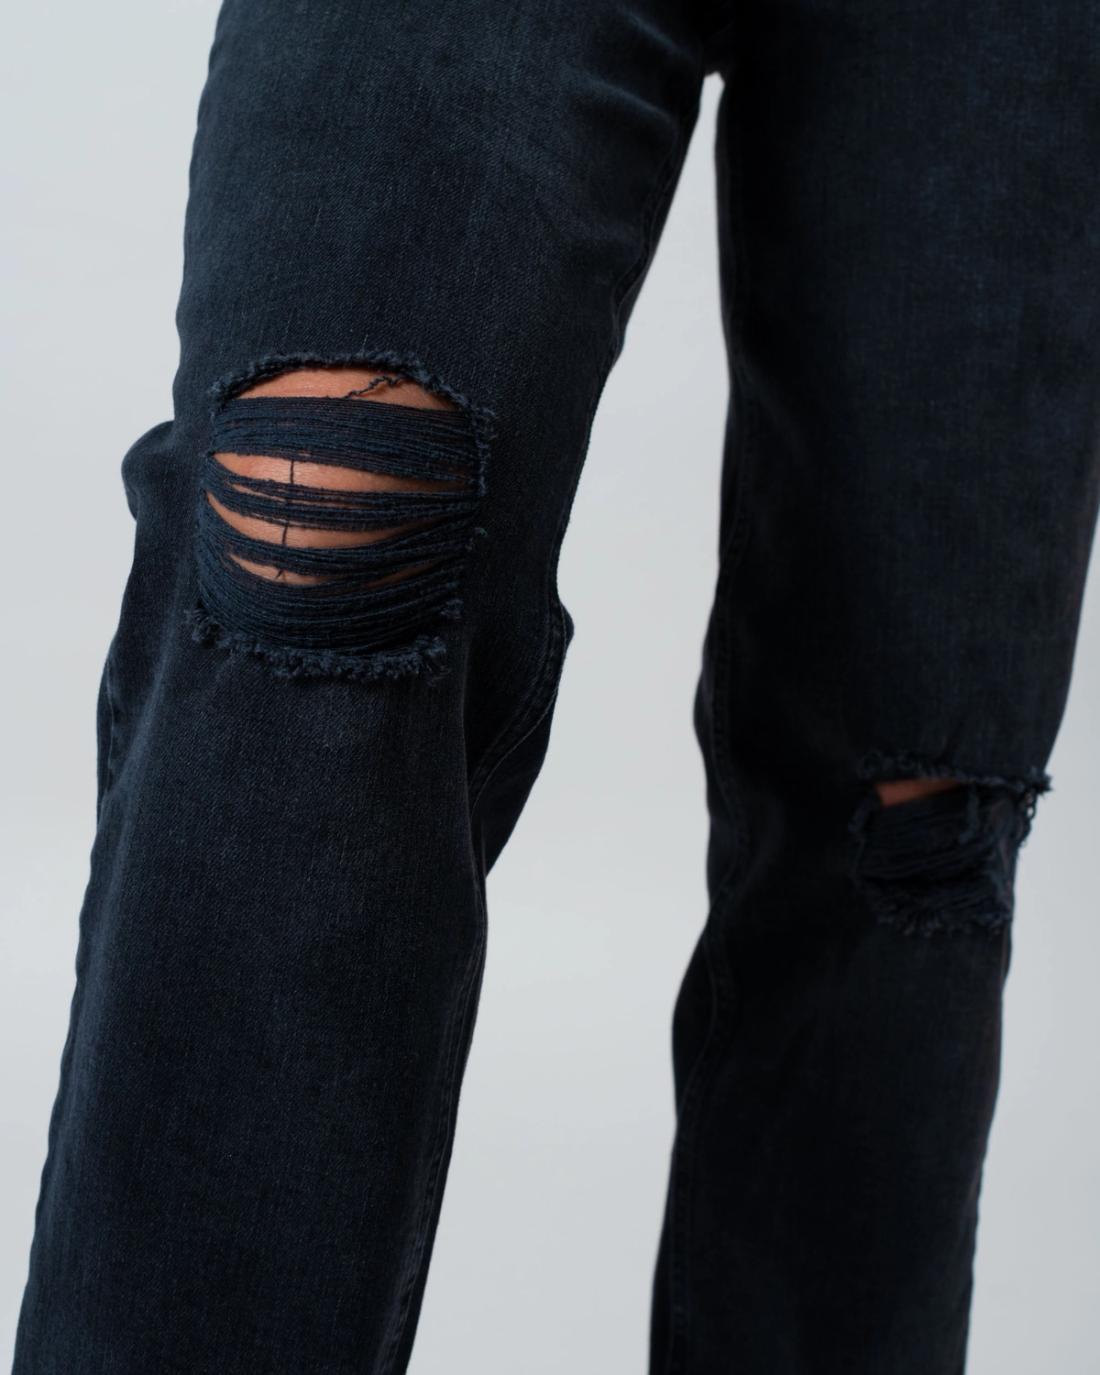 The Denims With Holes